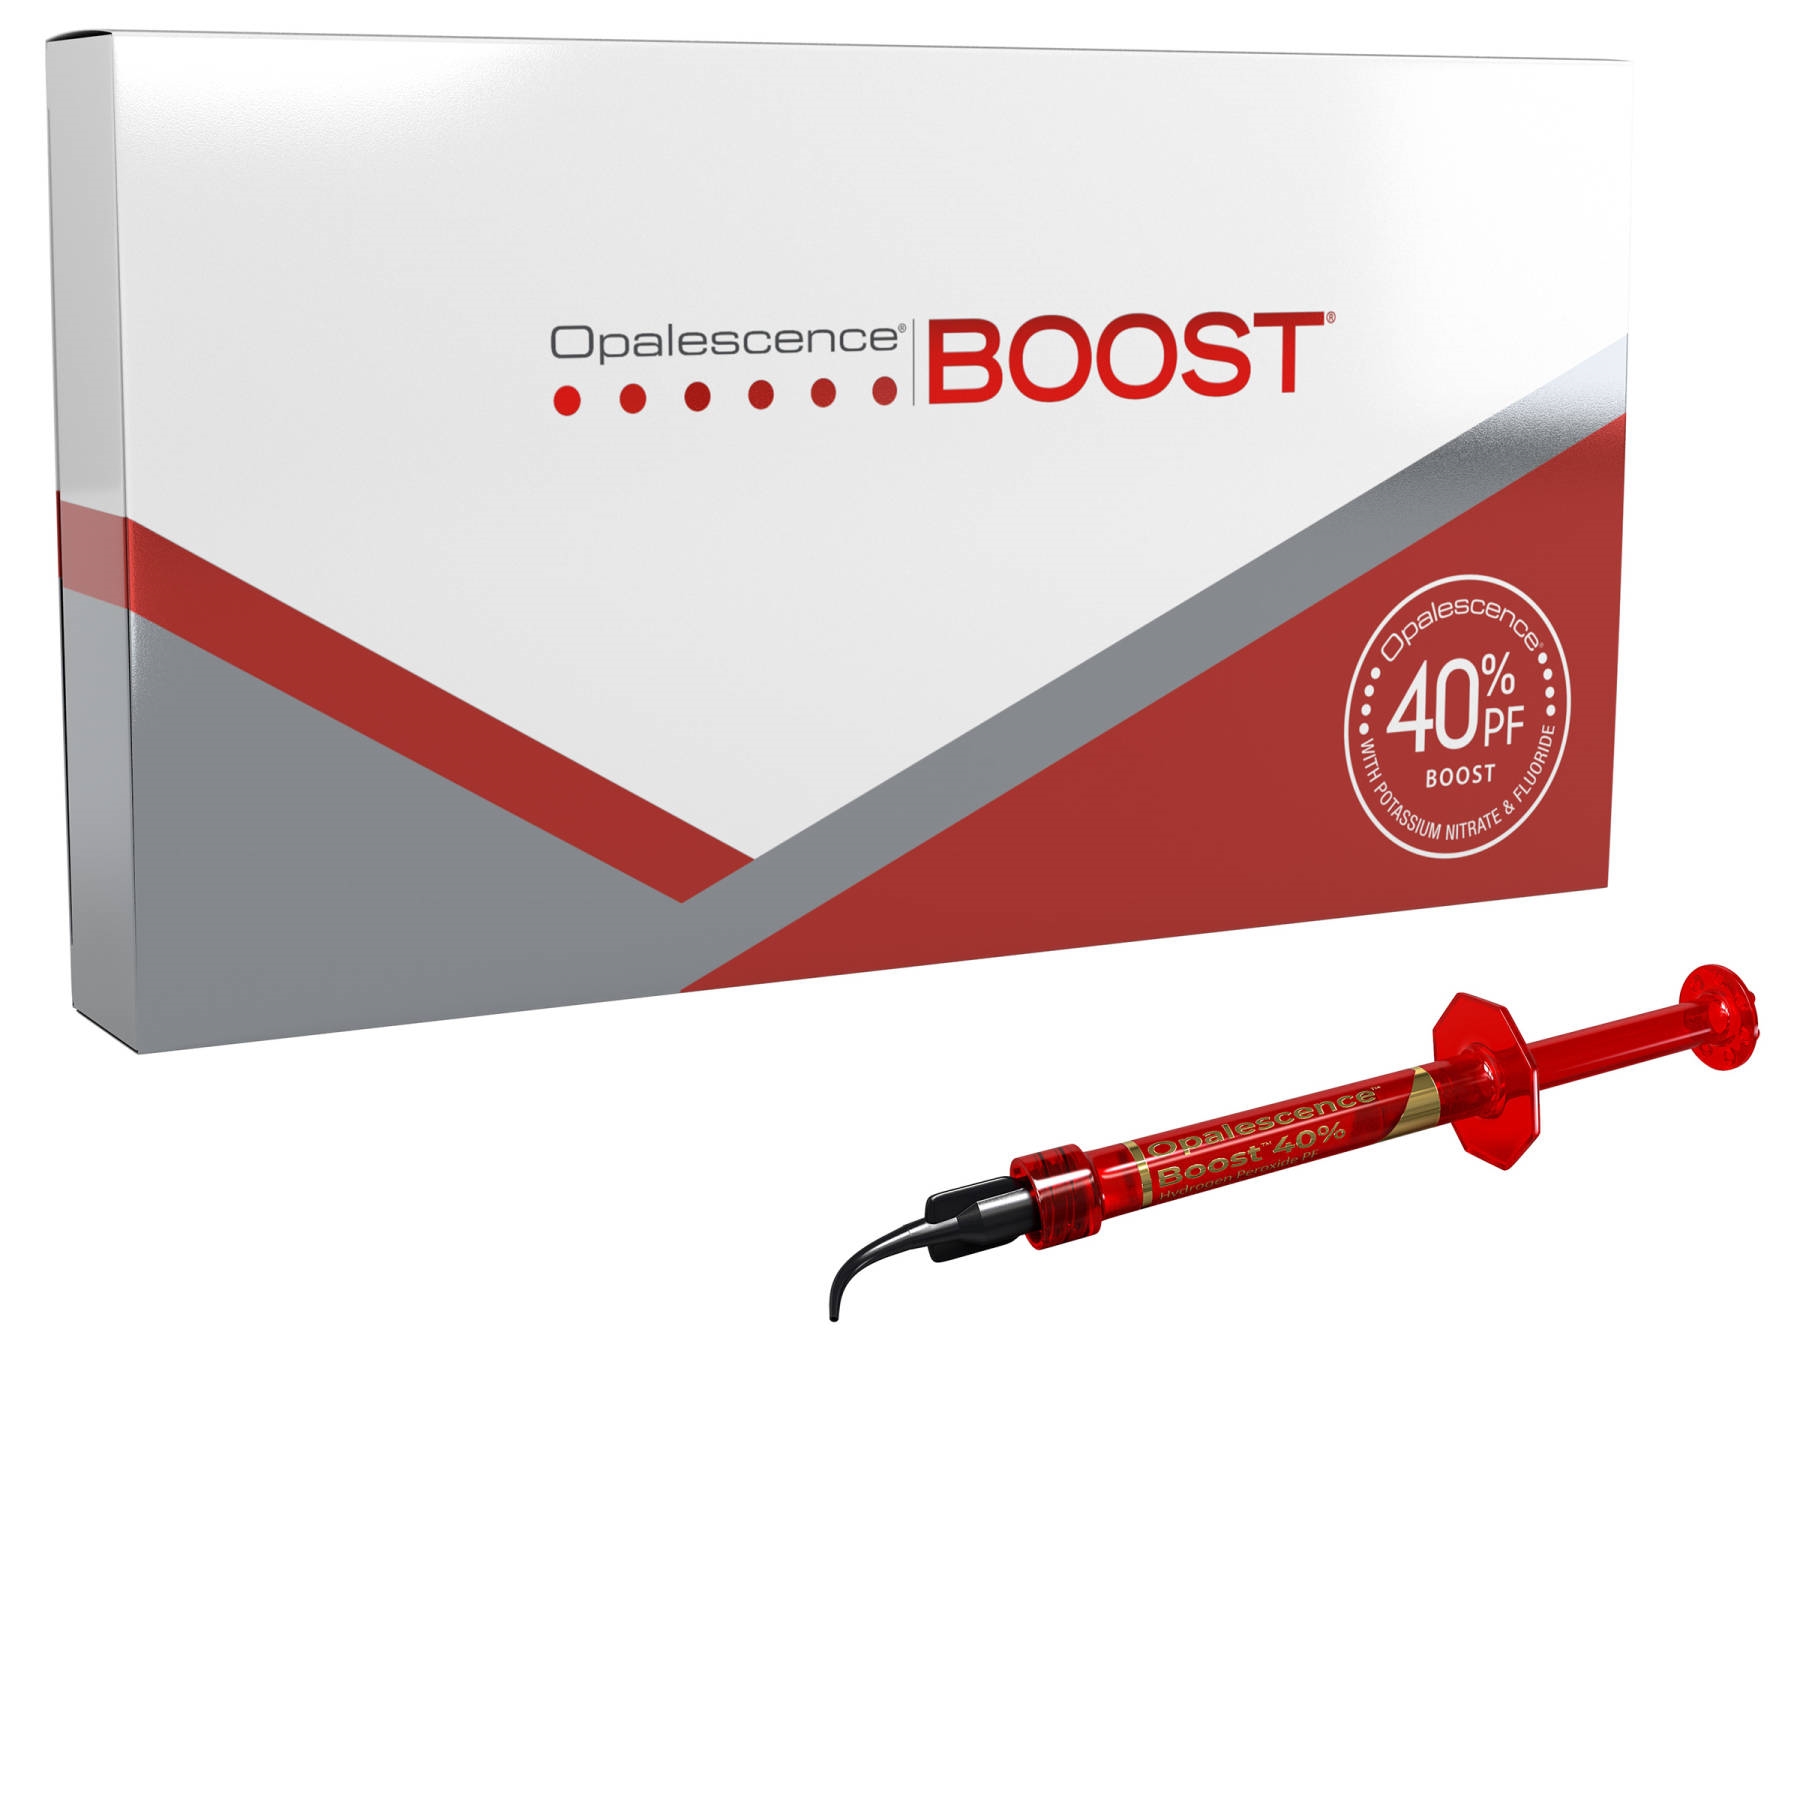 OPALESCENCE BOOST 40% 4750 INTRO KIT